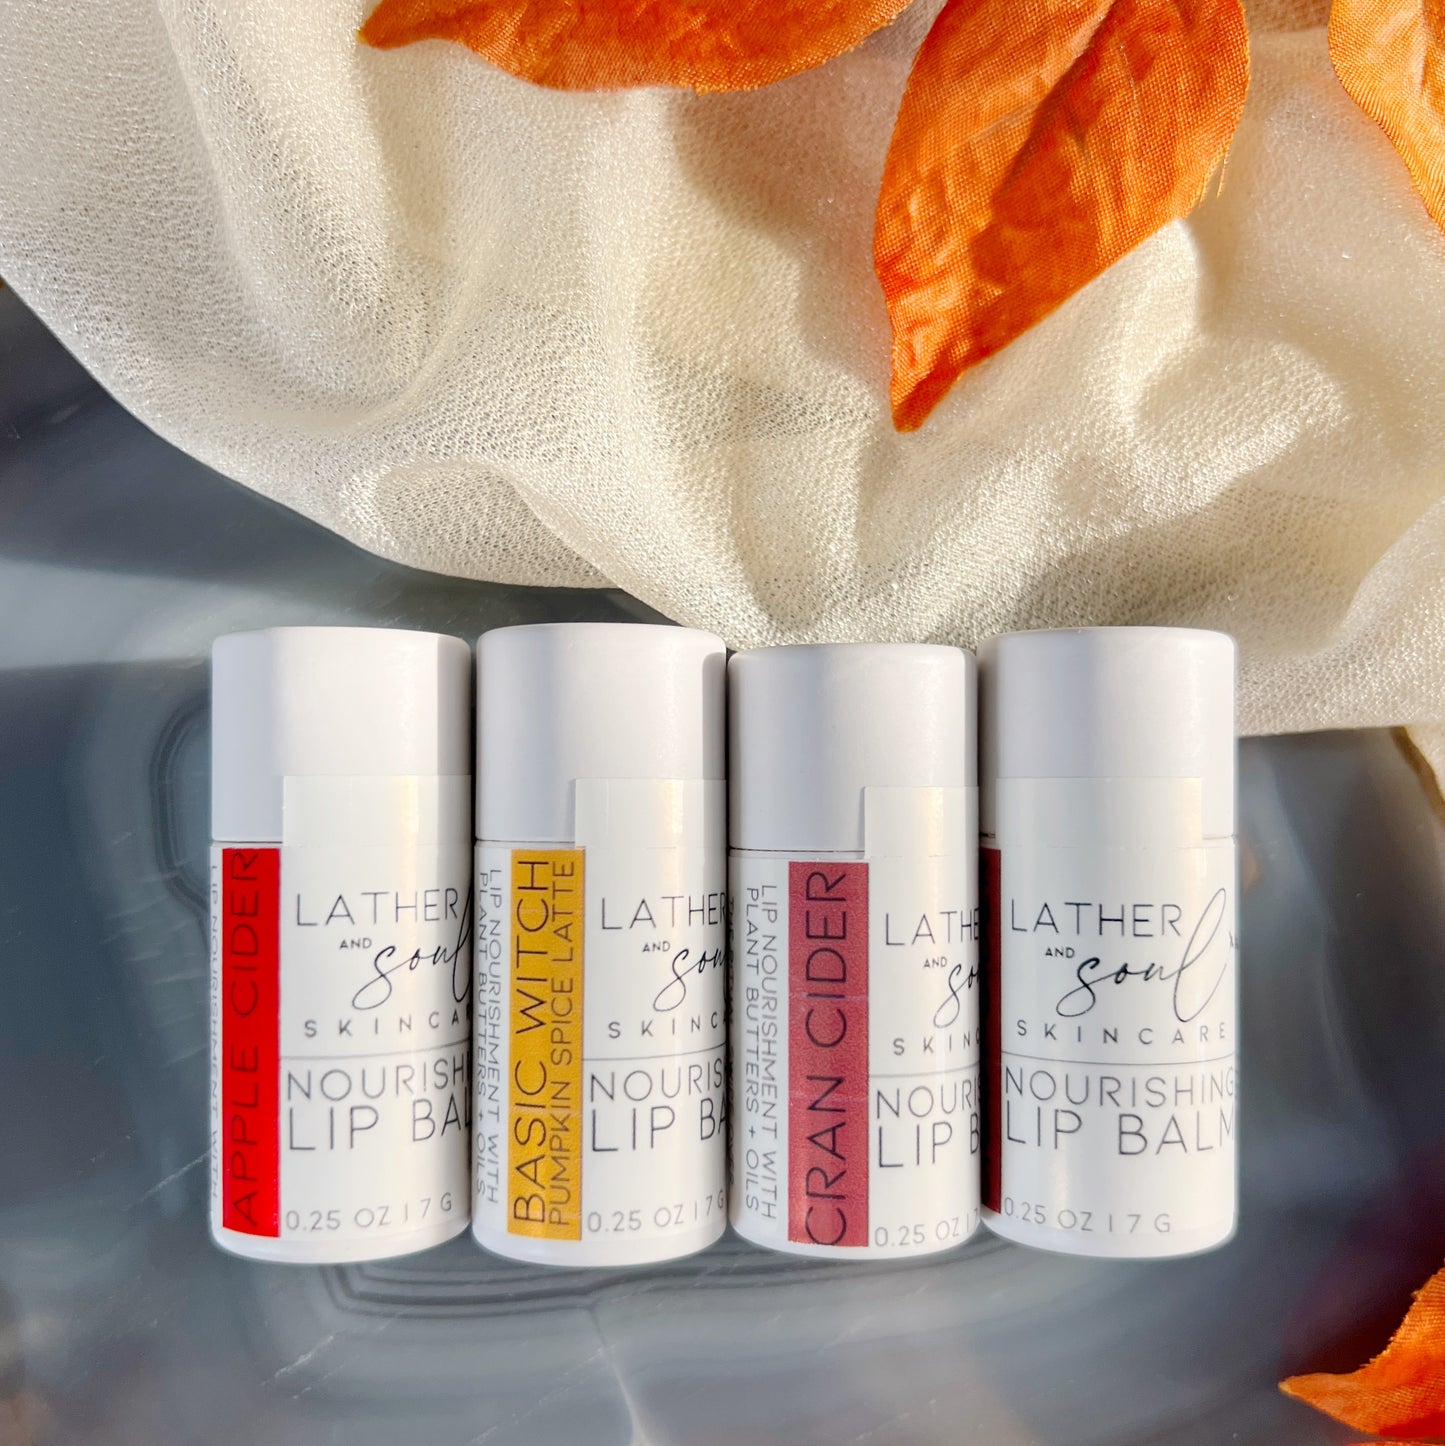 Fall Lip Balm Collection from Lather and Soul